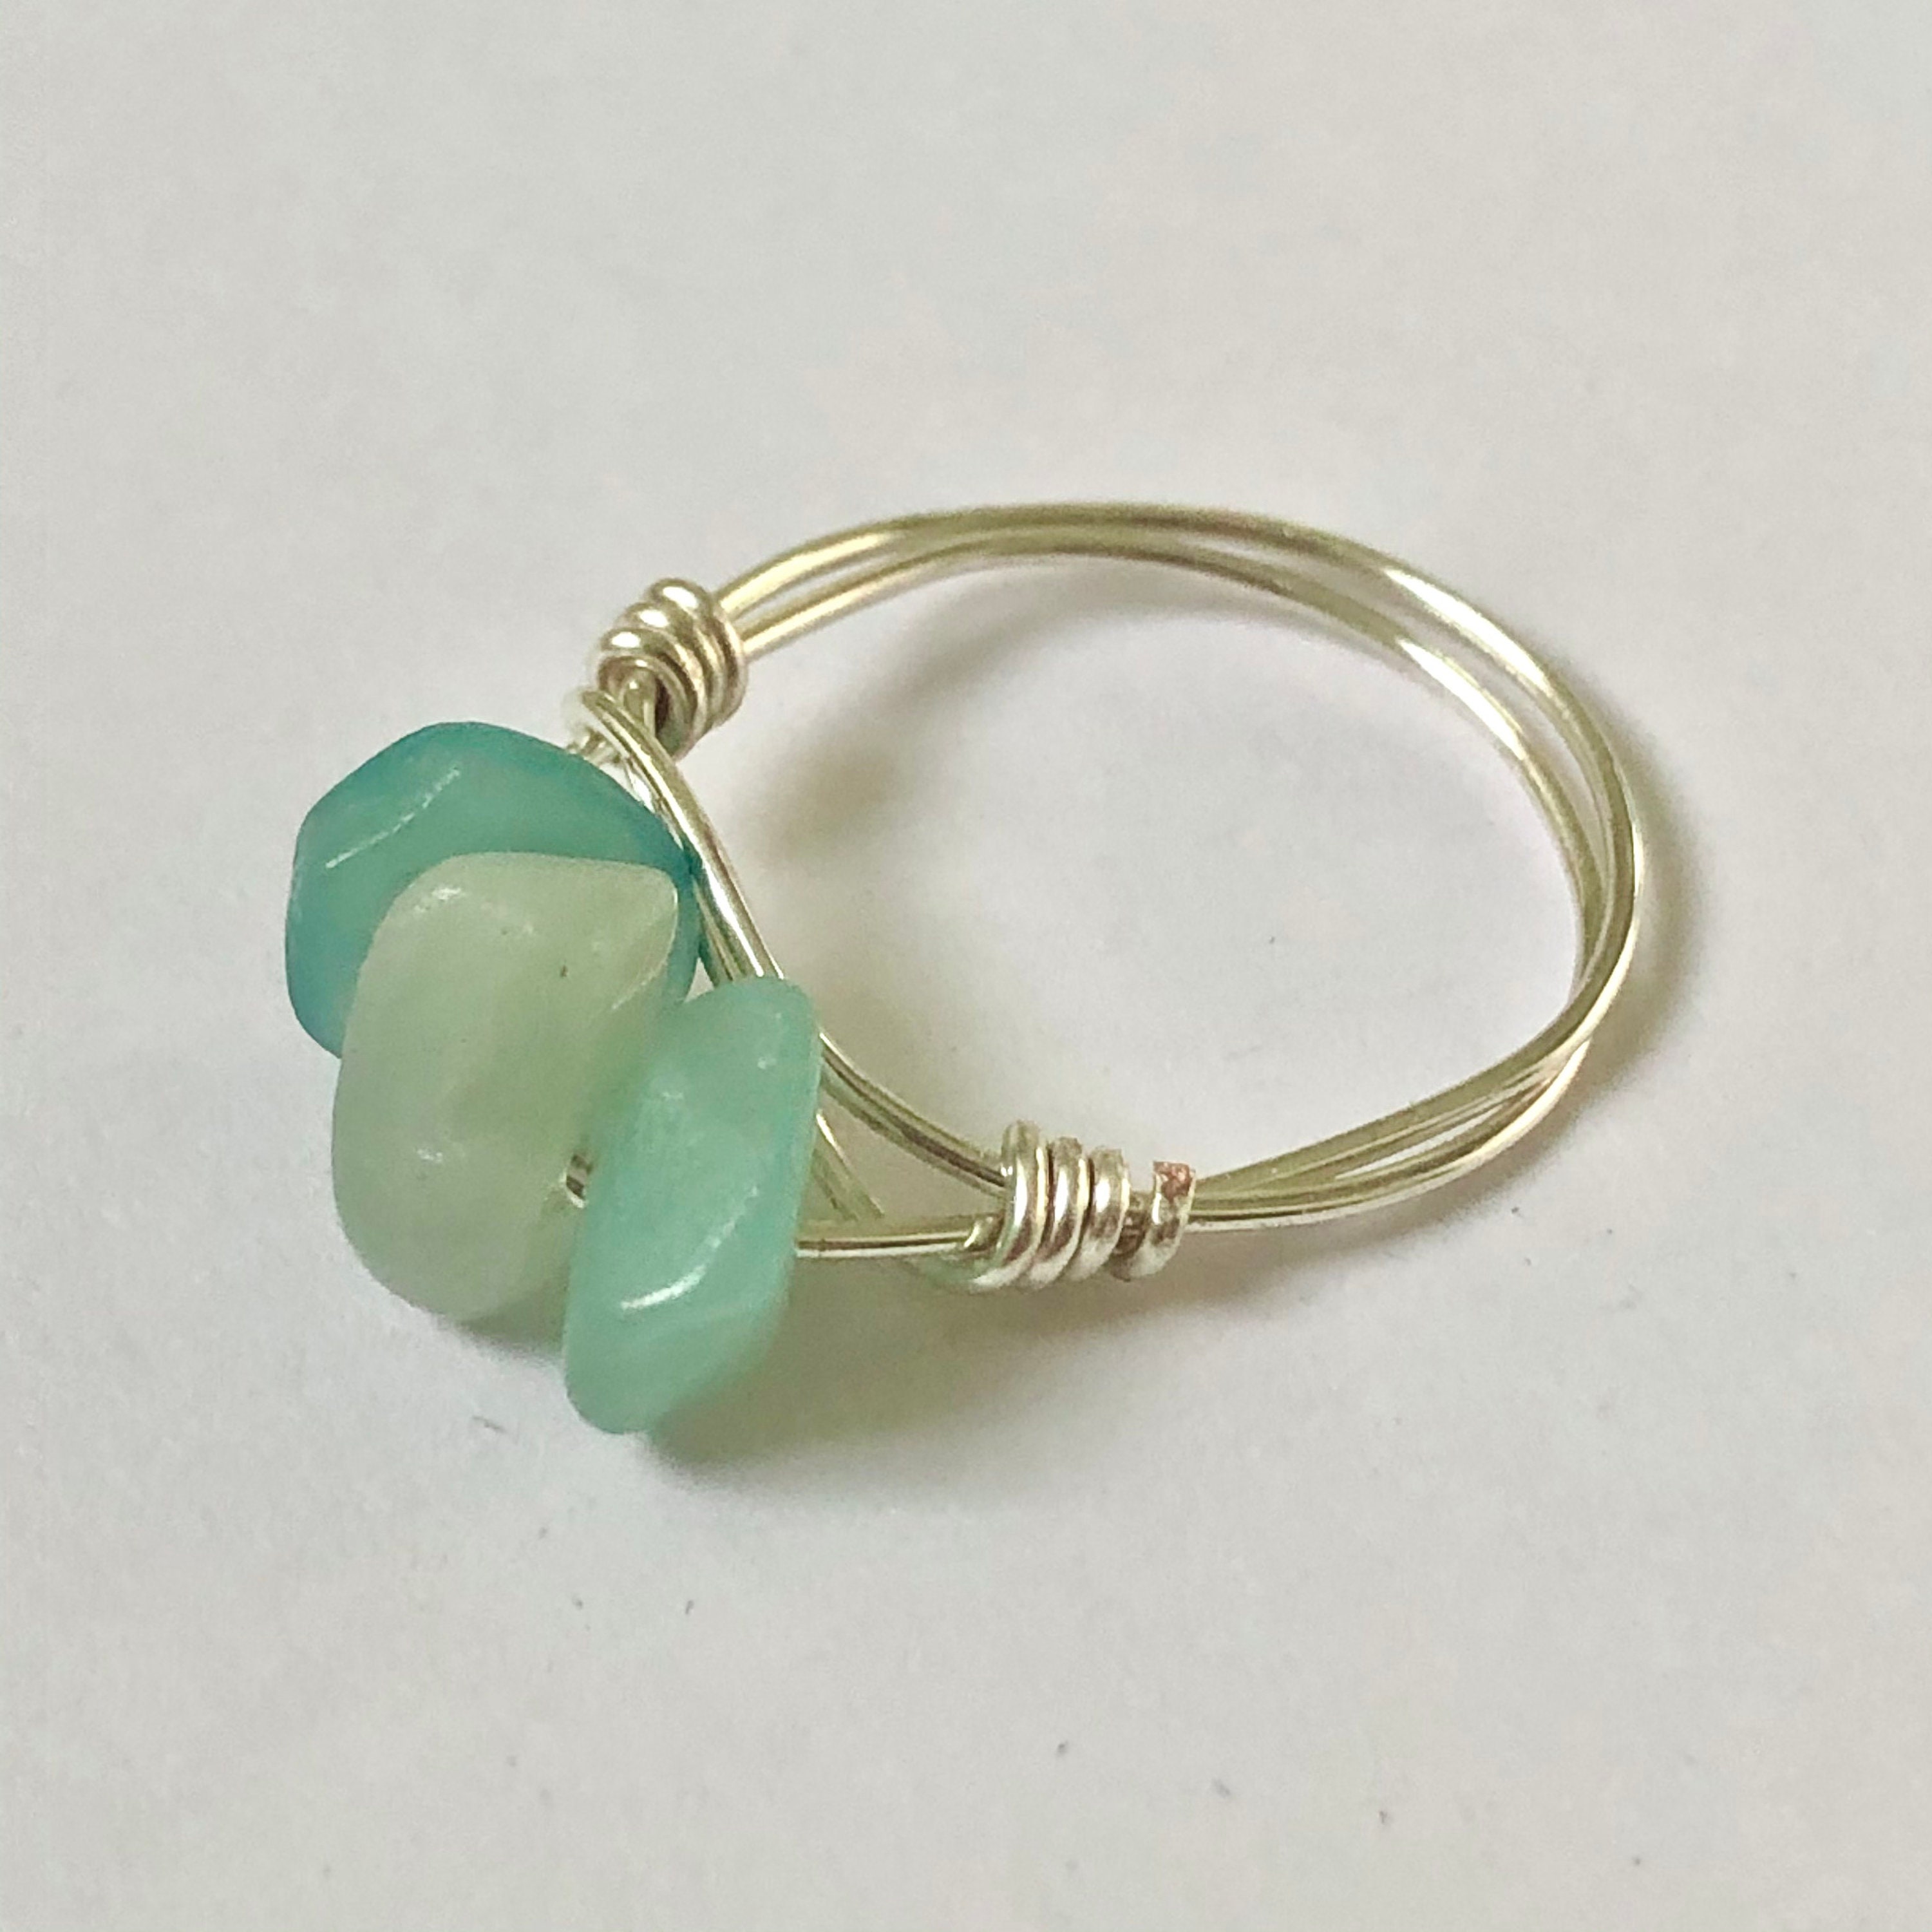 Amazonite wire wrapped ring.